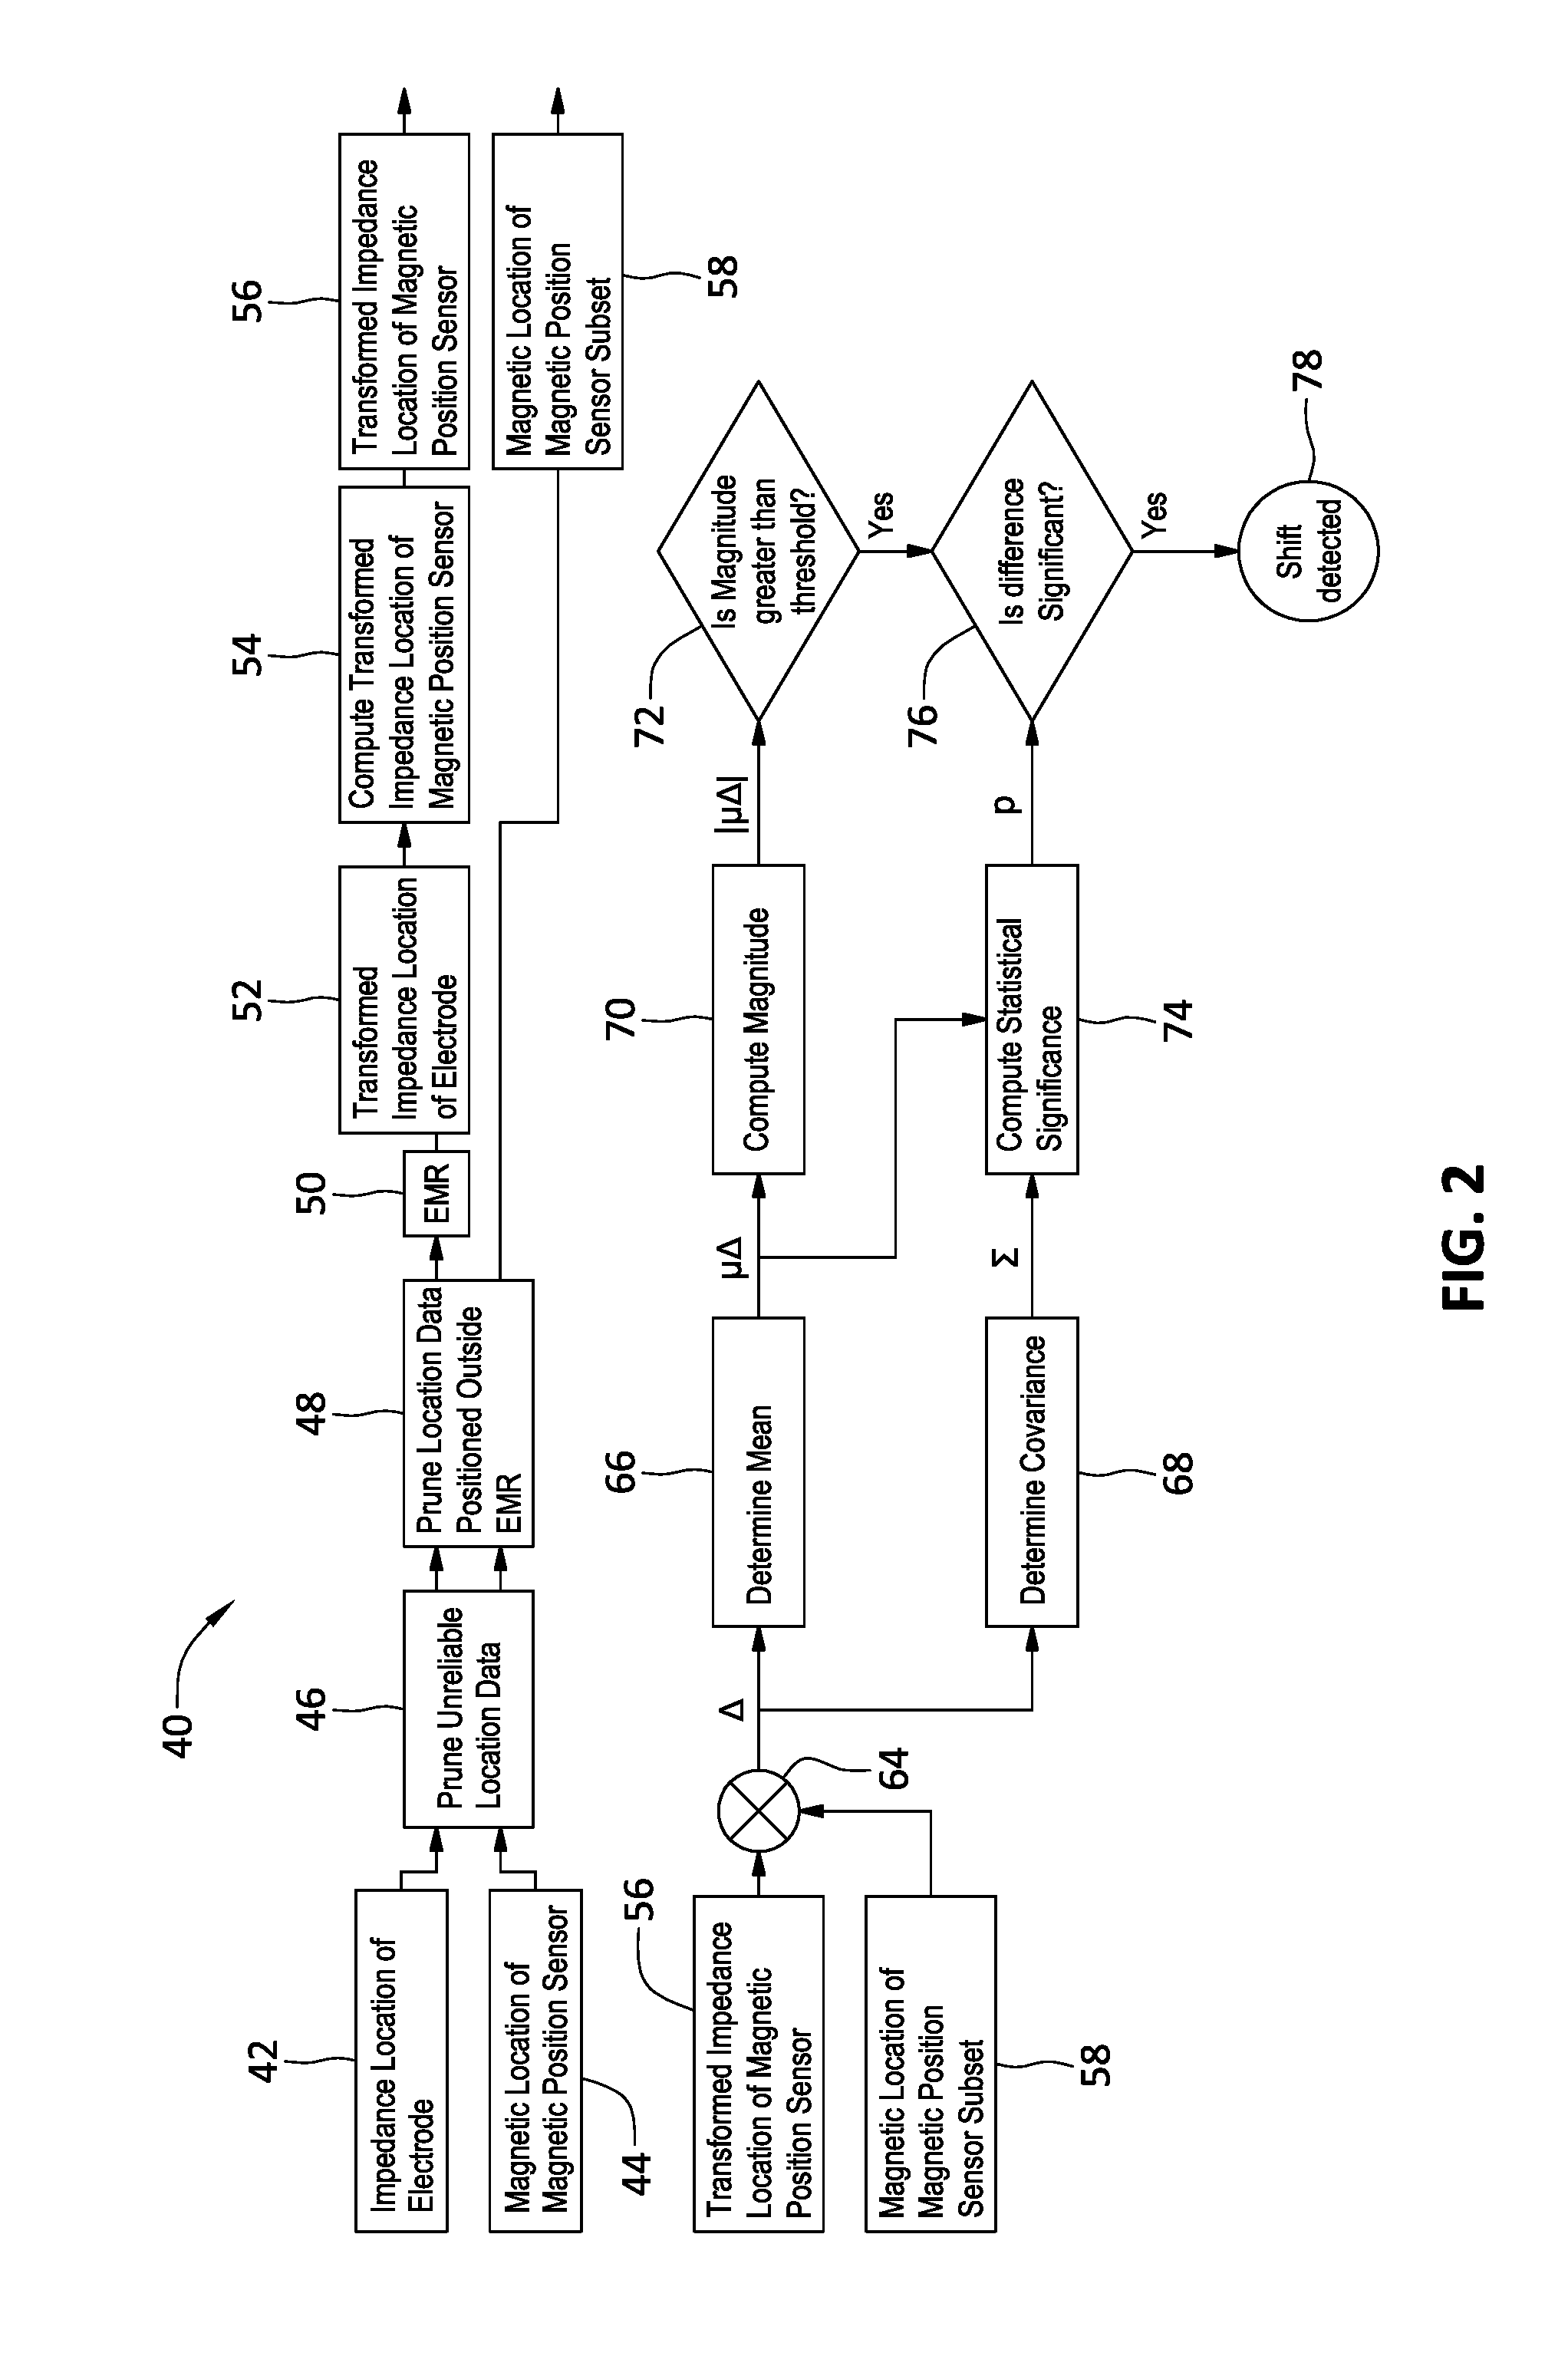 Impedance shift and drift detection and correction